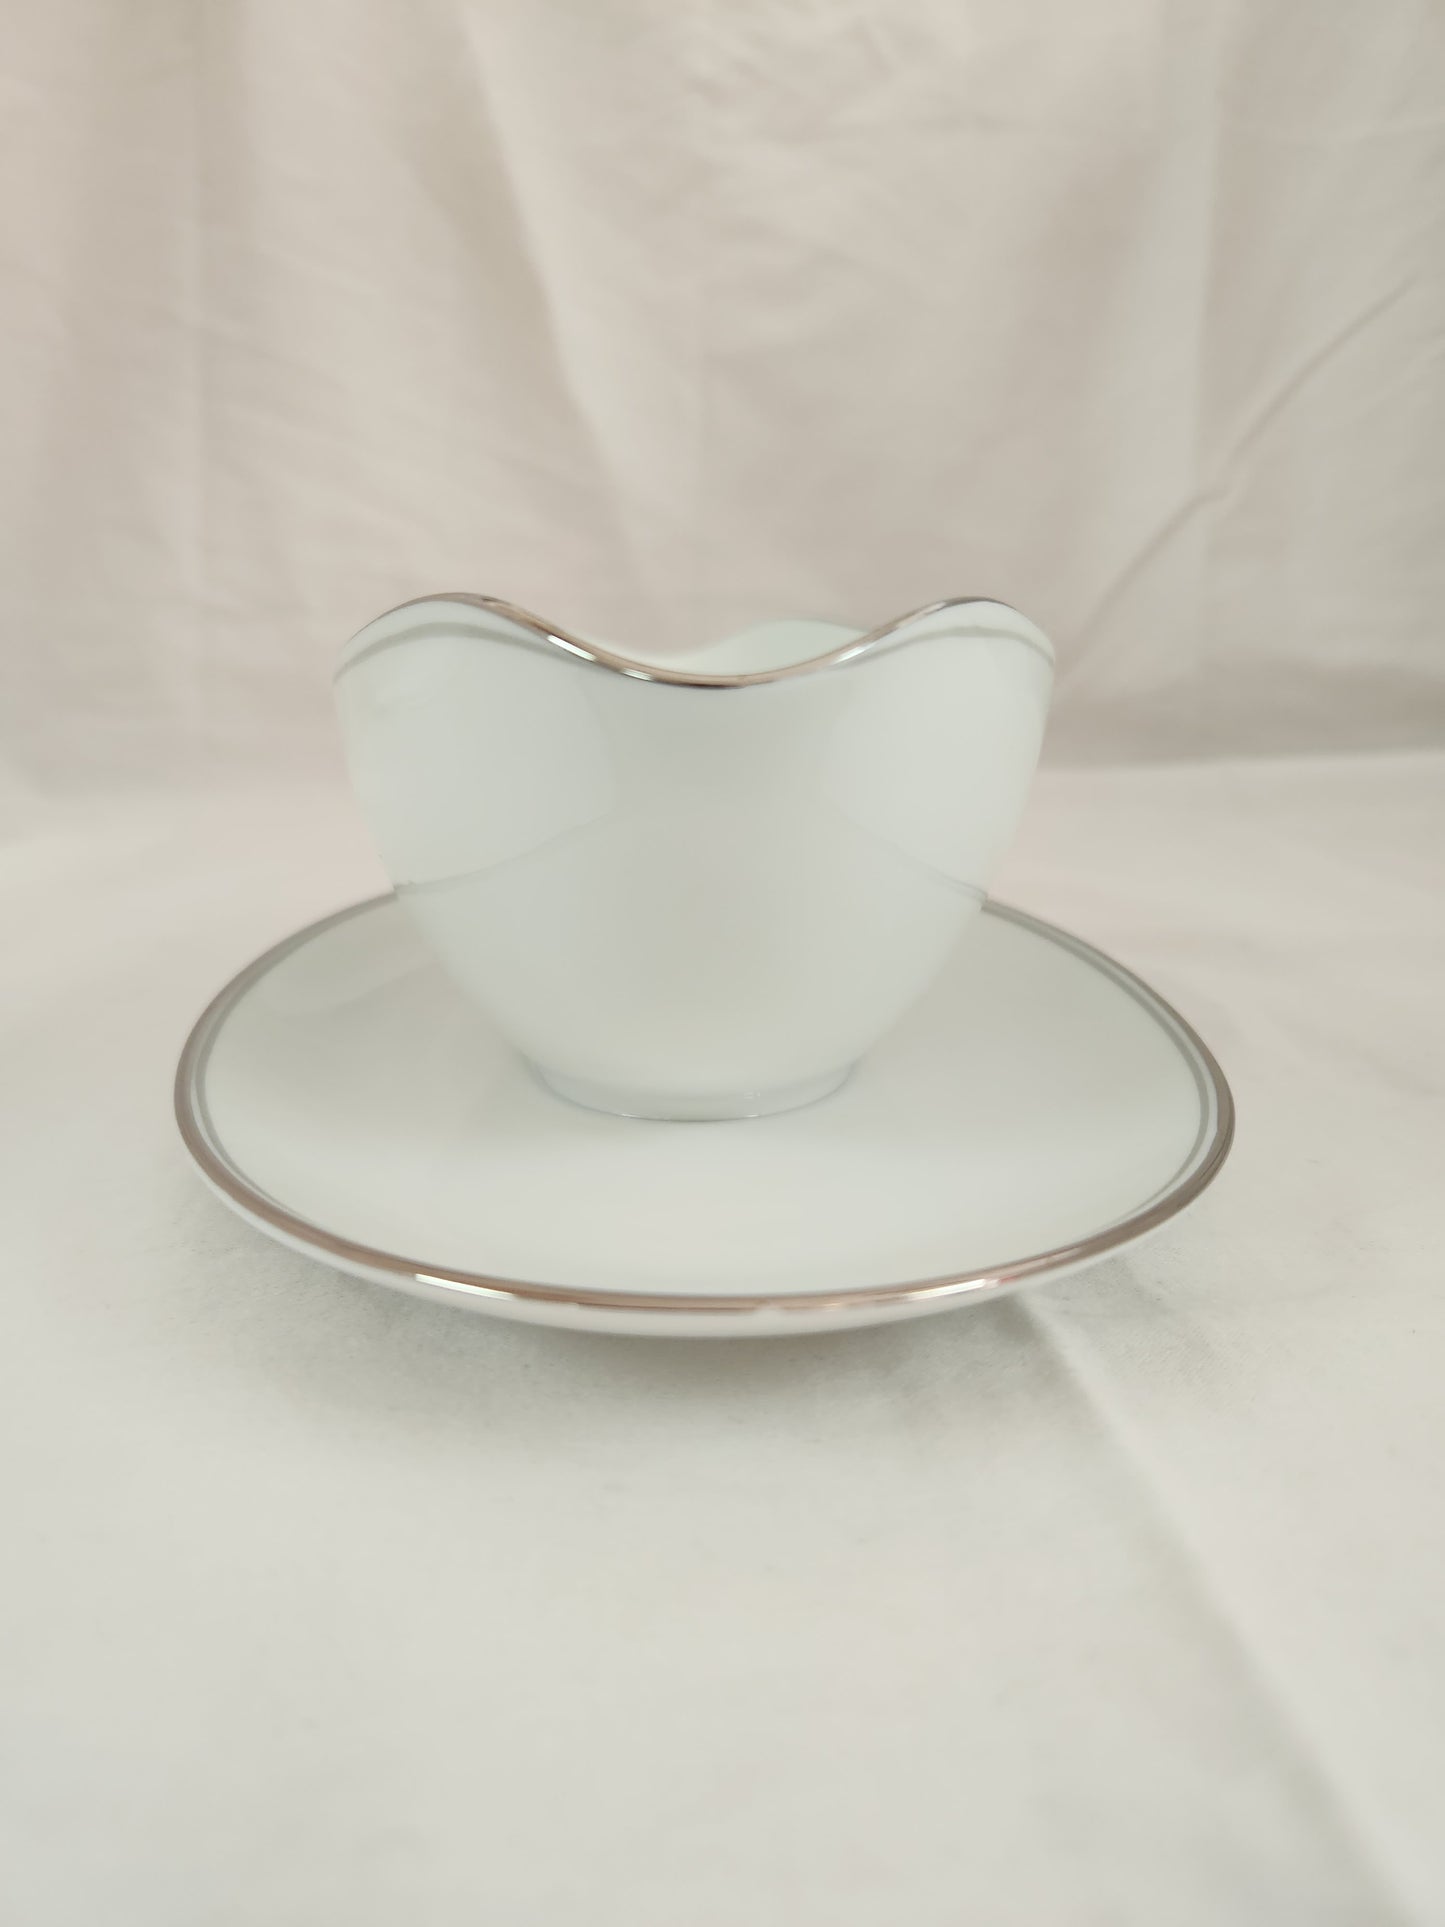 Noritake Graycliff Gravy Boat with Attached Underplate #5861